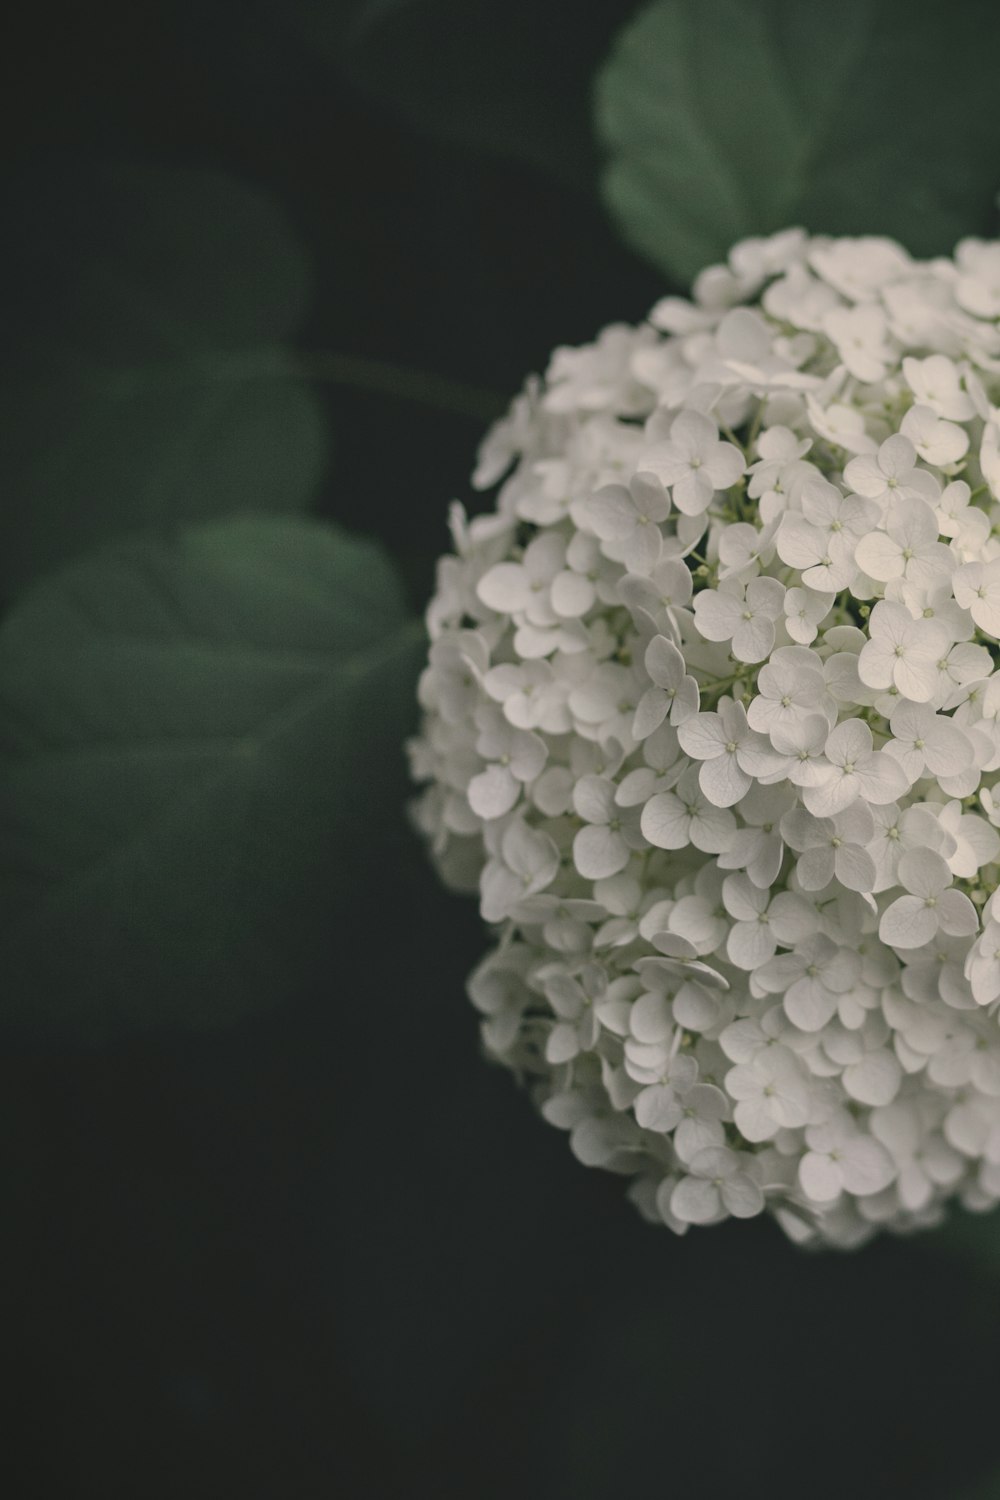 white spherical flower close-up photo